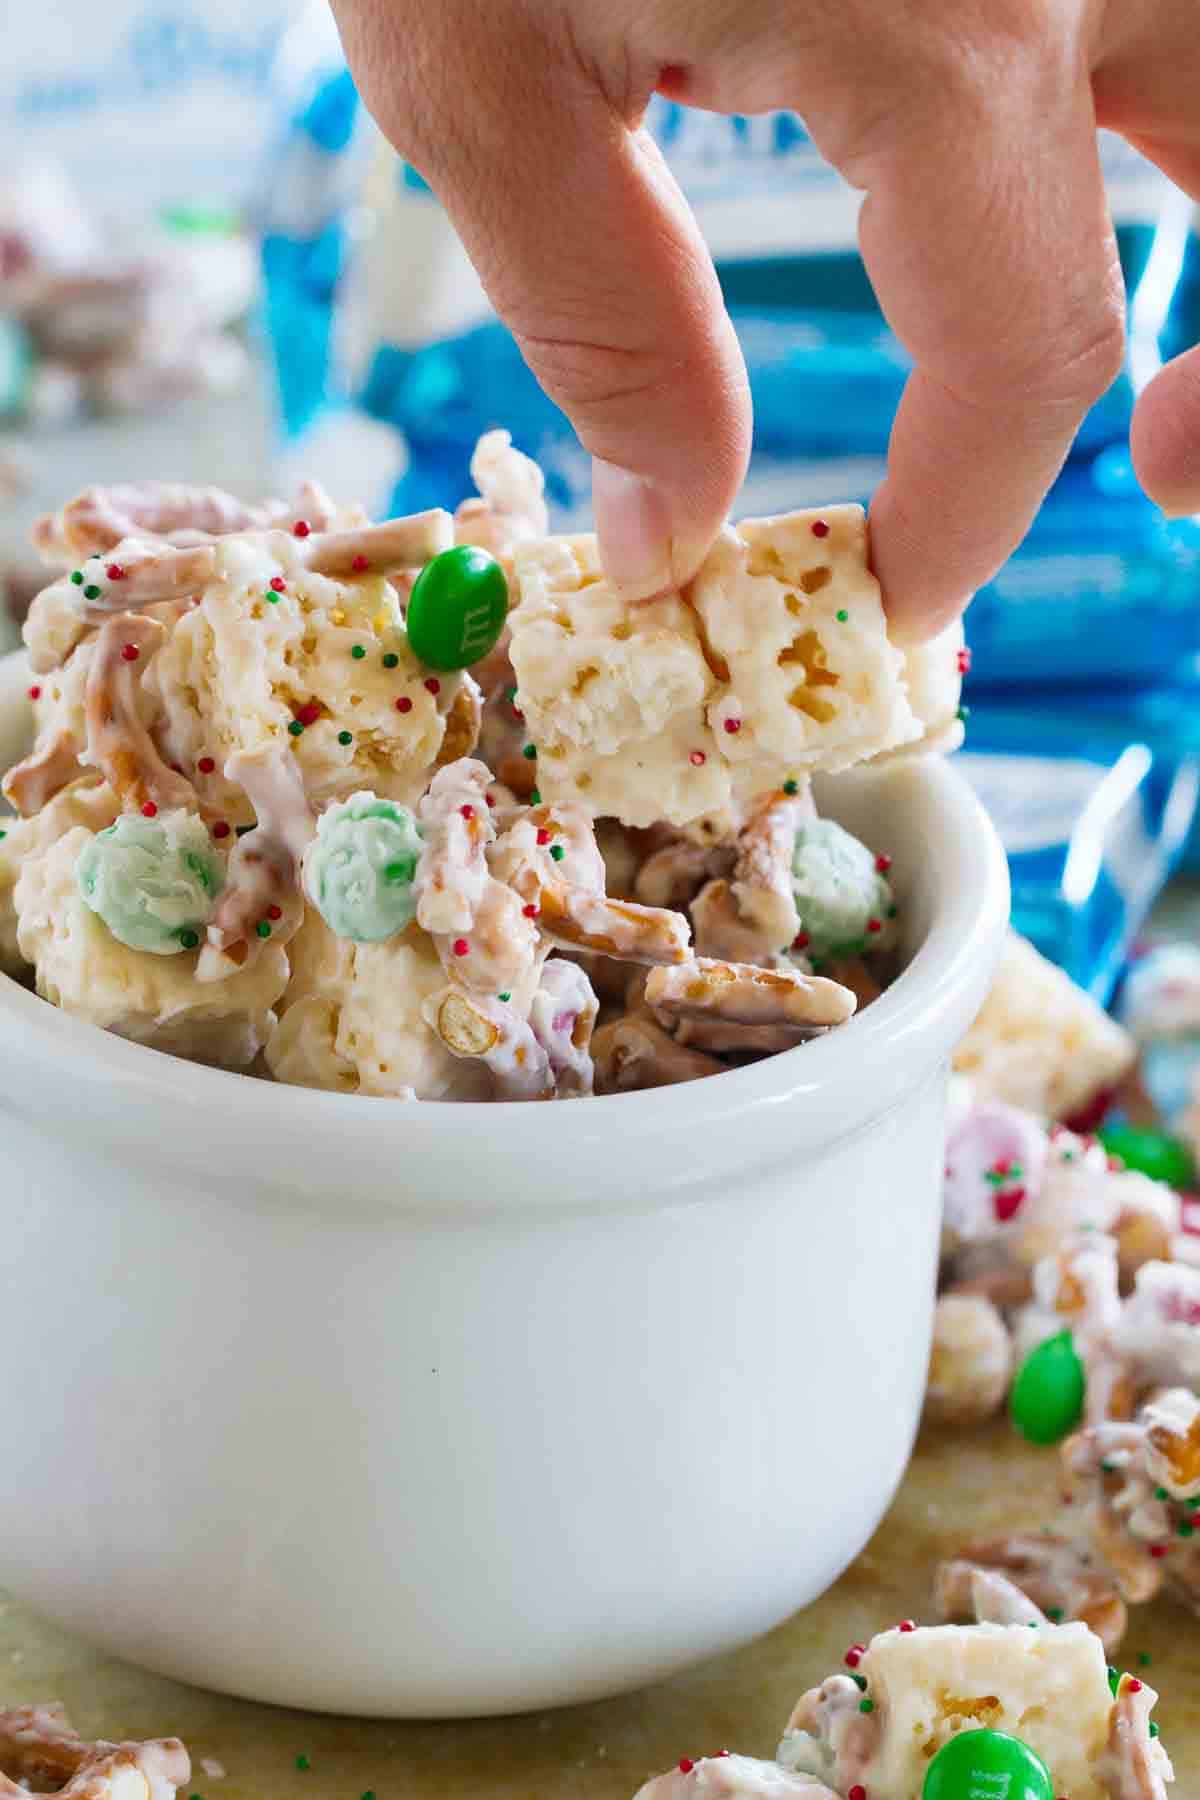 Sweet and salty Christmas mix in a bowl with a hand grabbing some out.